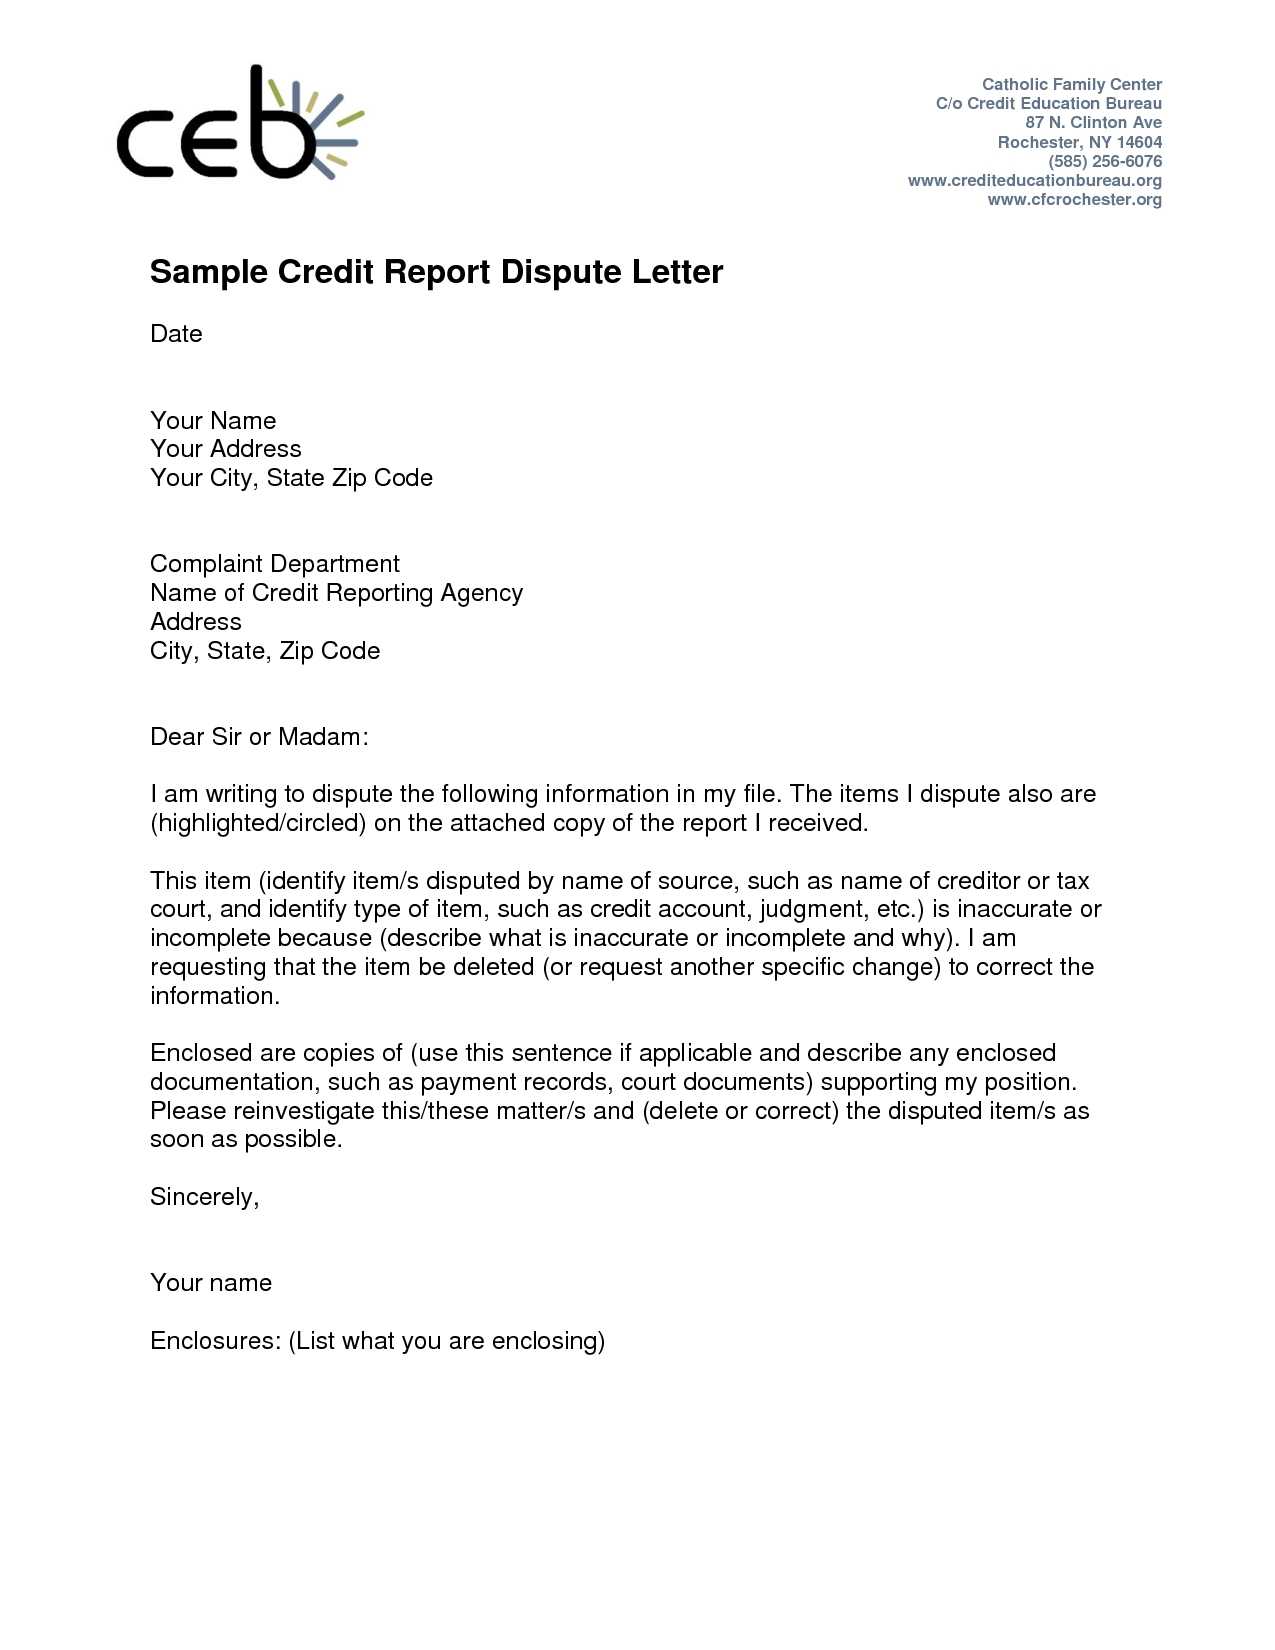 Dispute Letter For Credit Card Charges – Dalep.midnightpig.co Inside Credit Report Dispute Letter Template